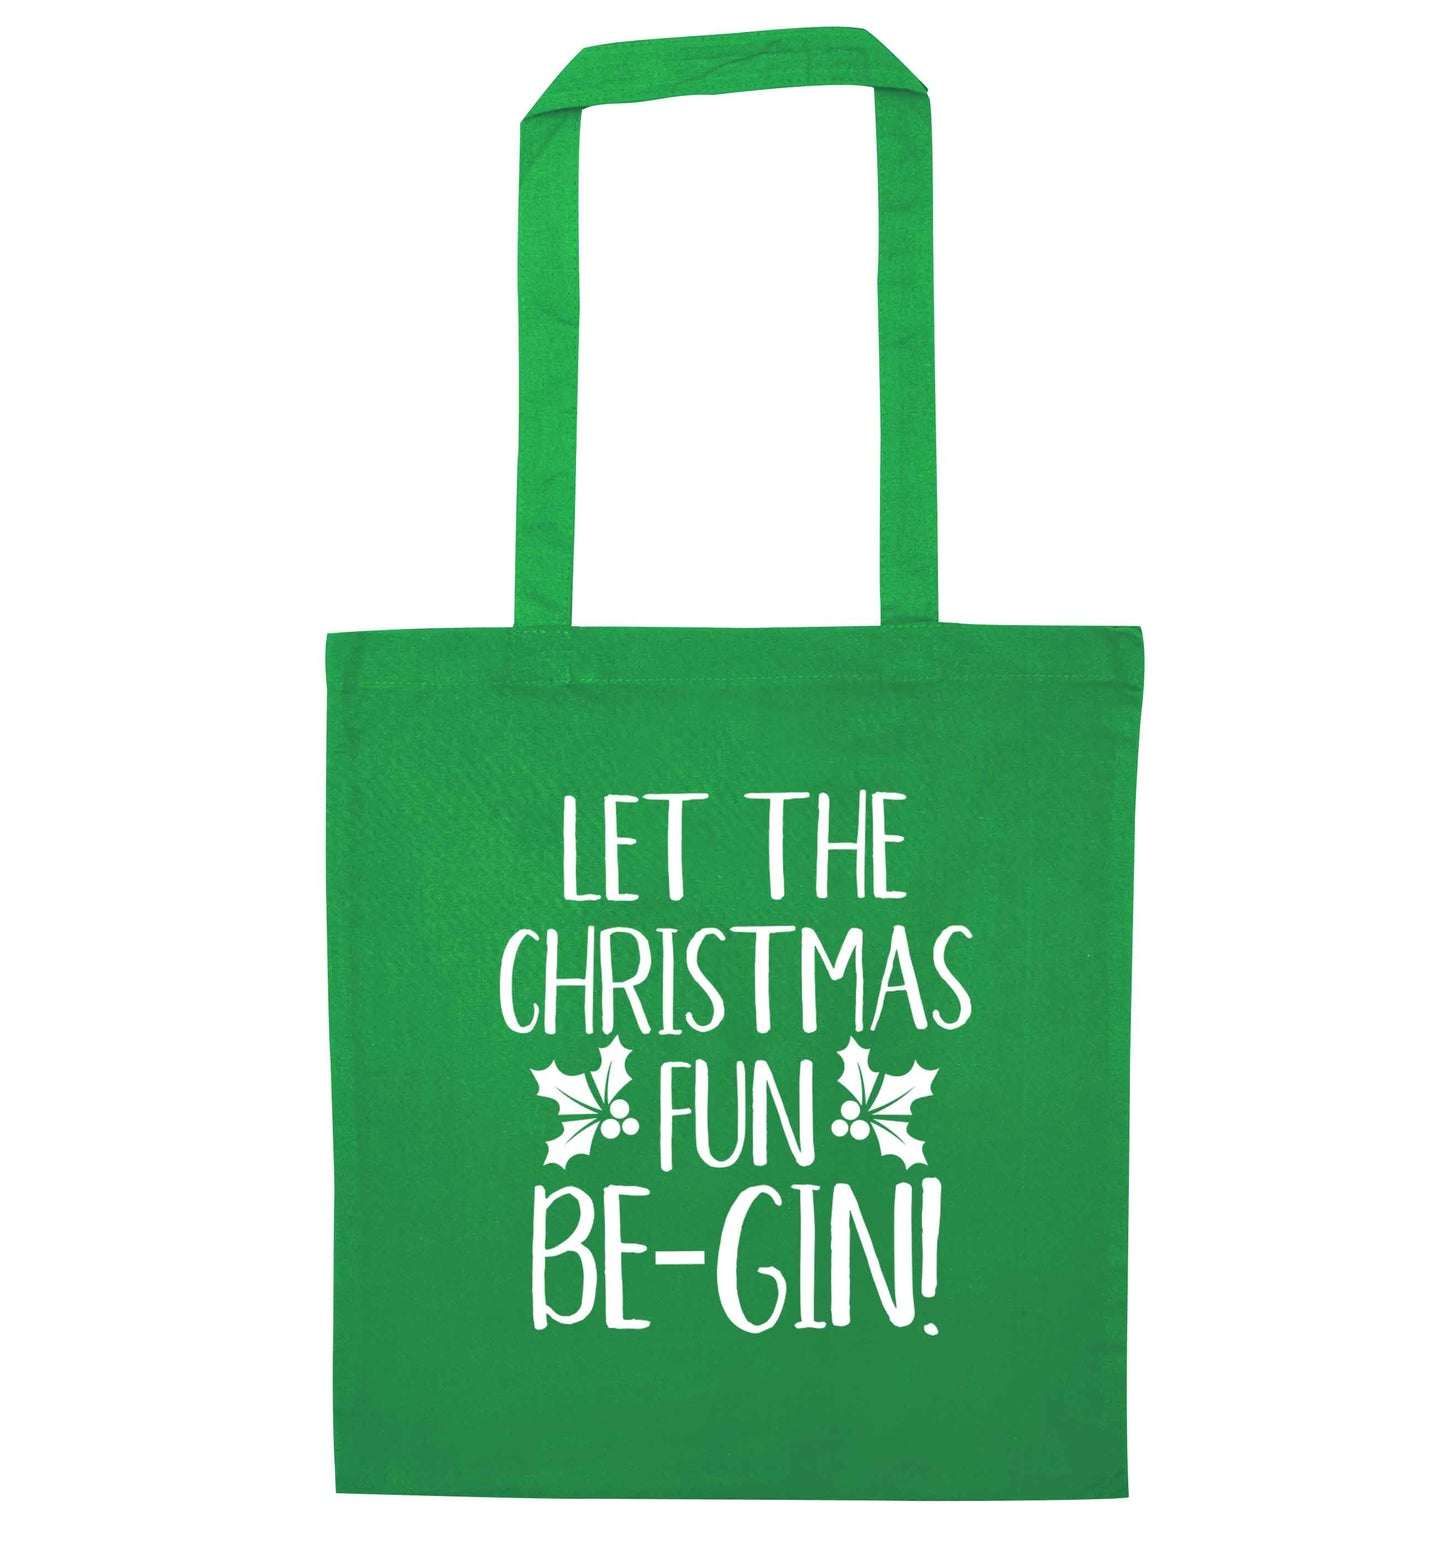 Let the christmas fun be-gin green tote bag